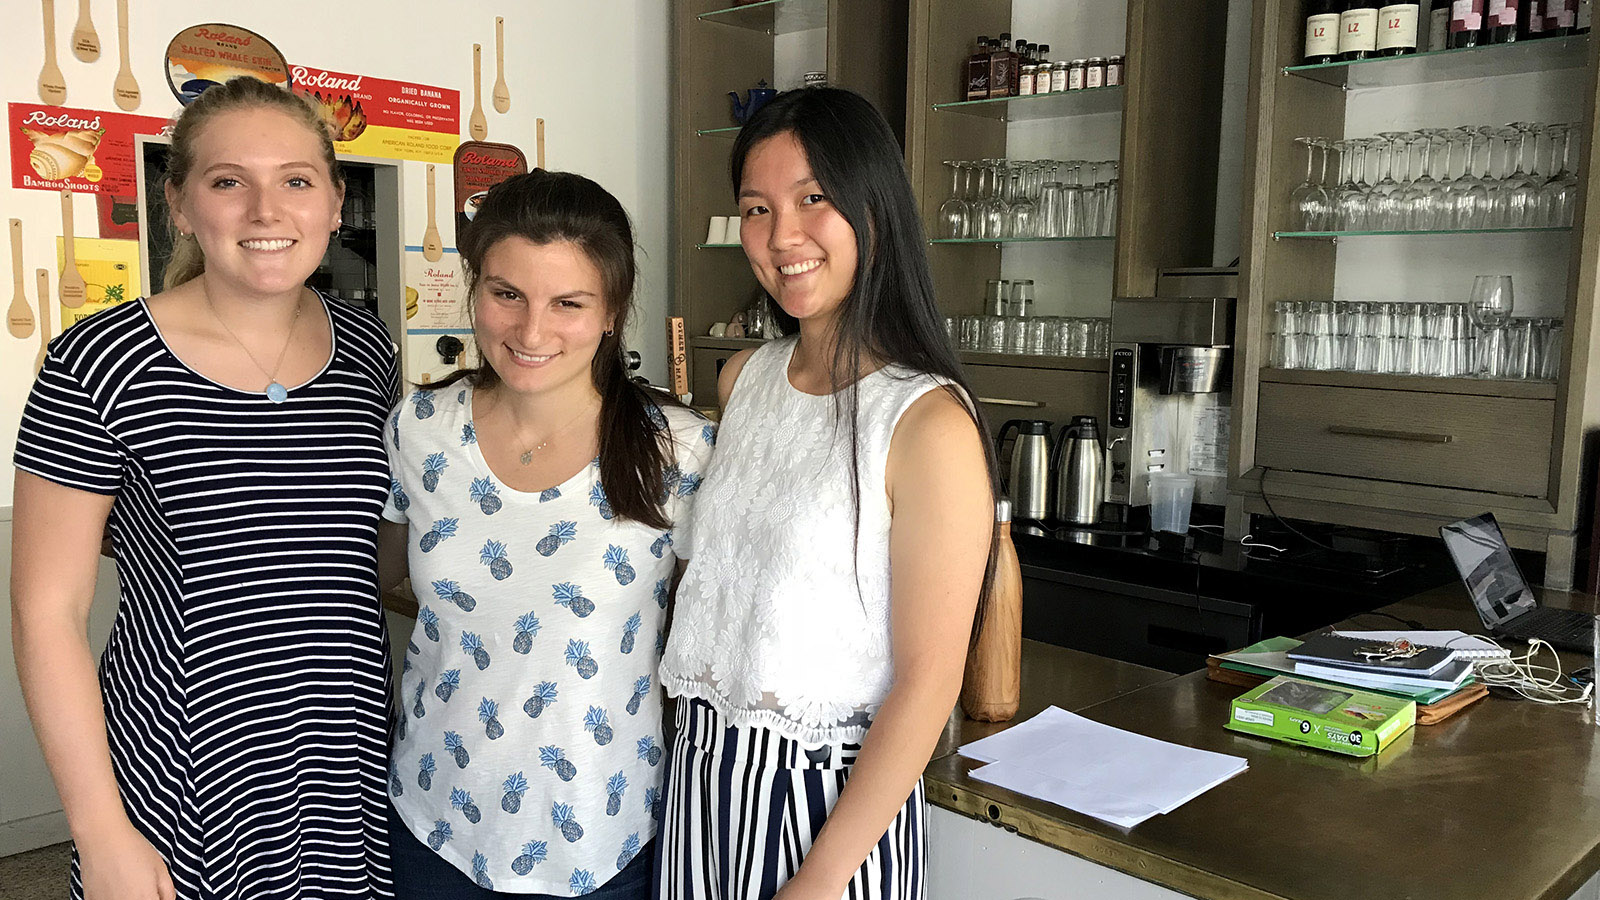 Two student interns stand with non-profit founder inside restaurant